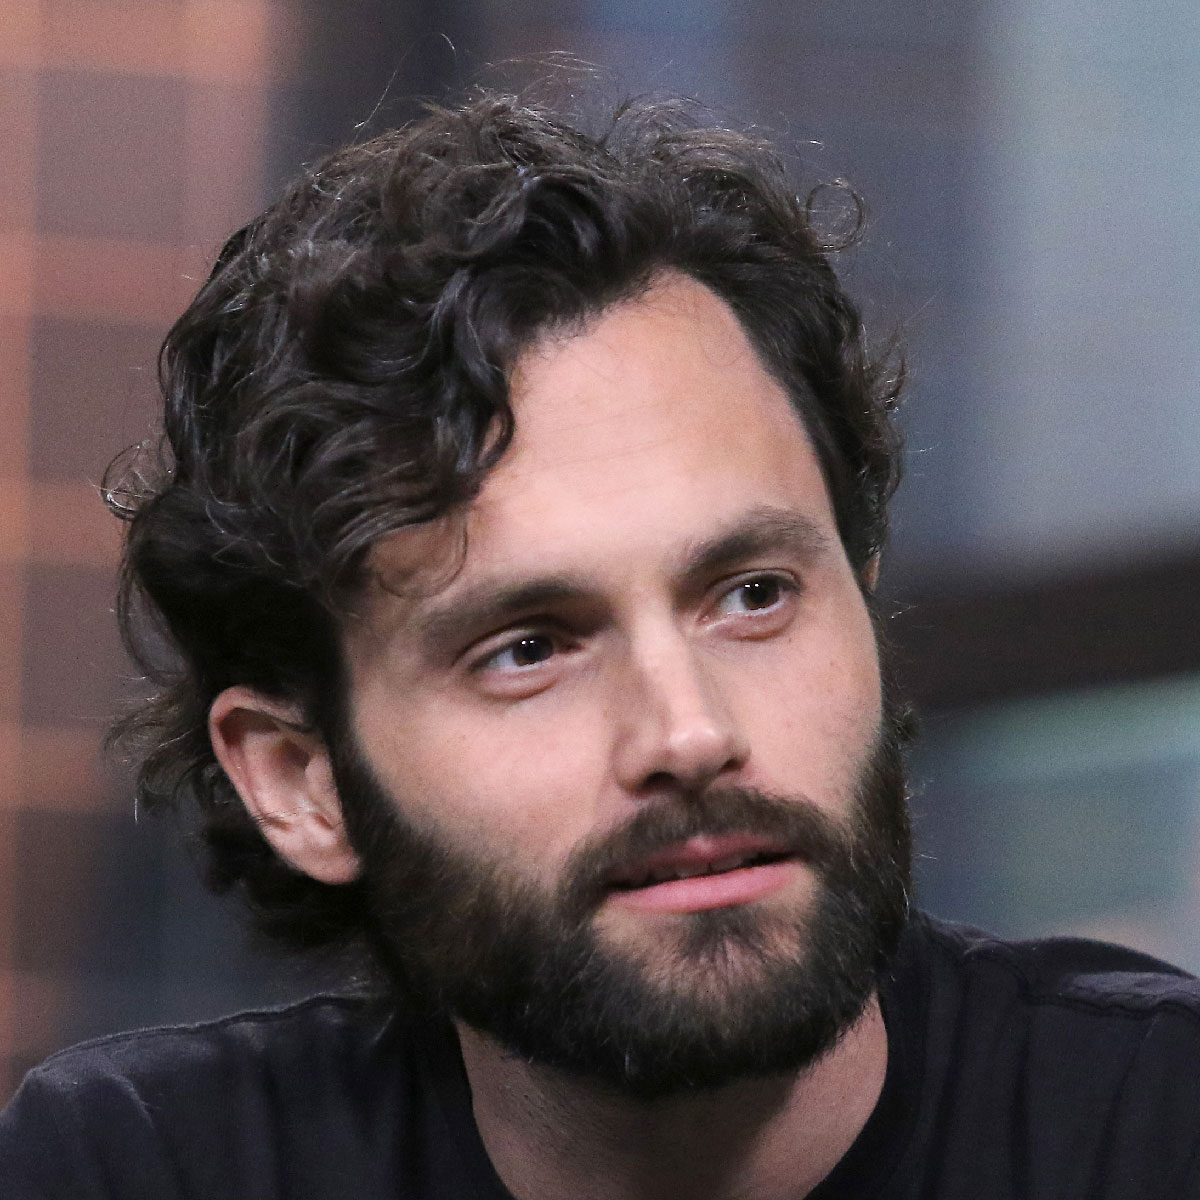 penn-badgley-curly-medium-length-hairstyle-side-parting-hairstyle-haircut-man-for-himself-ft.jpg